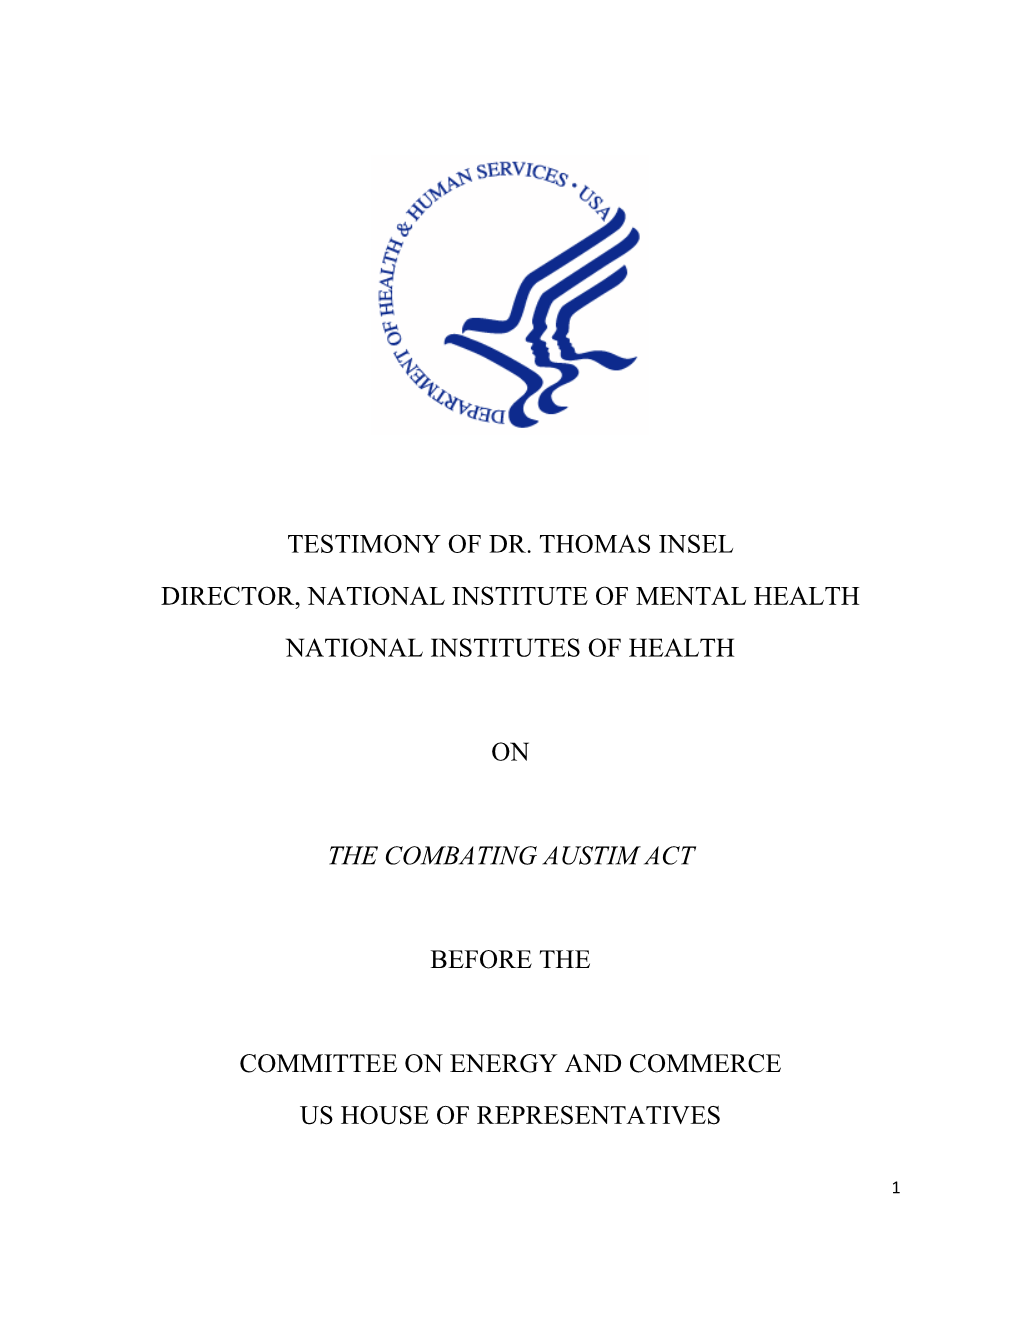 Written Statement for Dr. Thomas Insel, NIMH Director